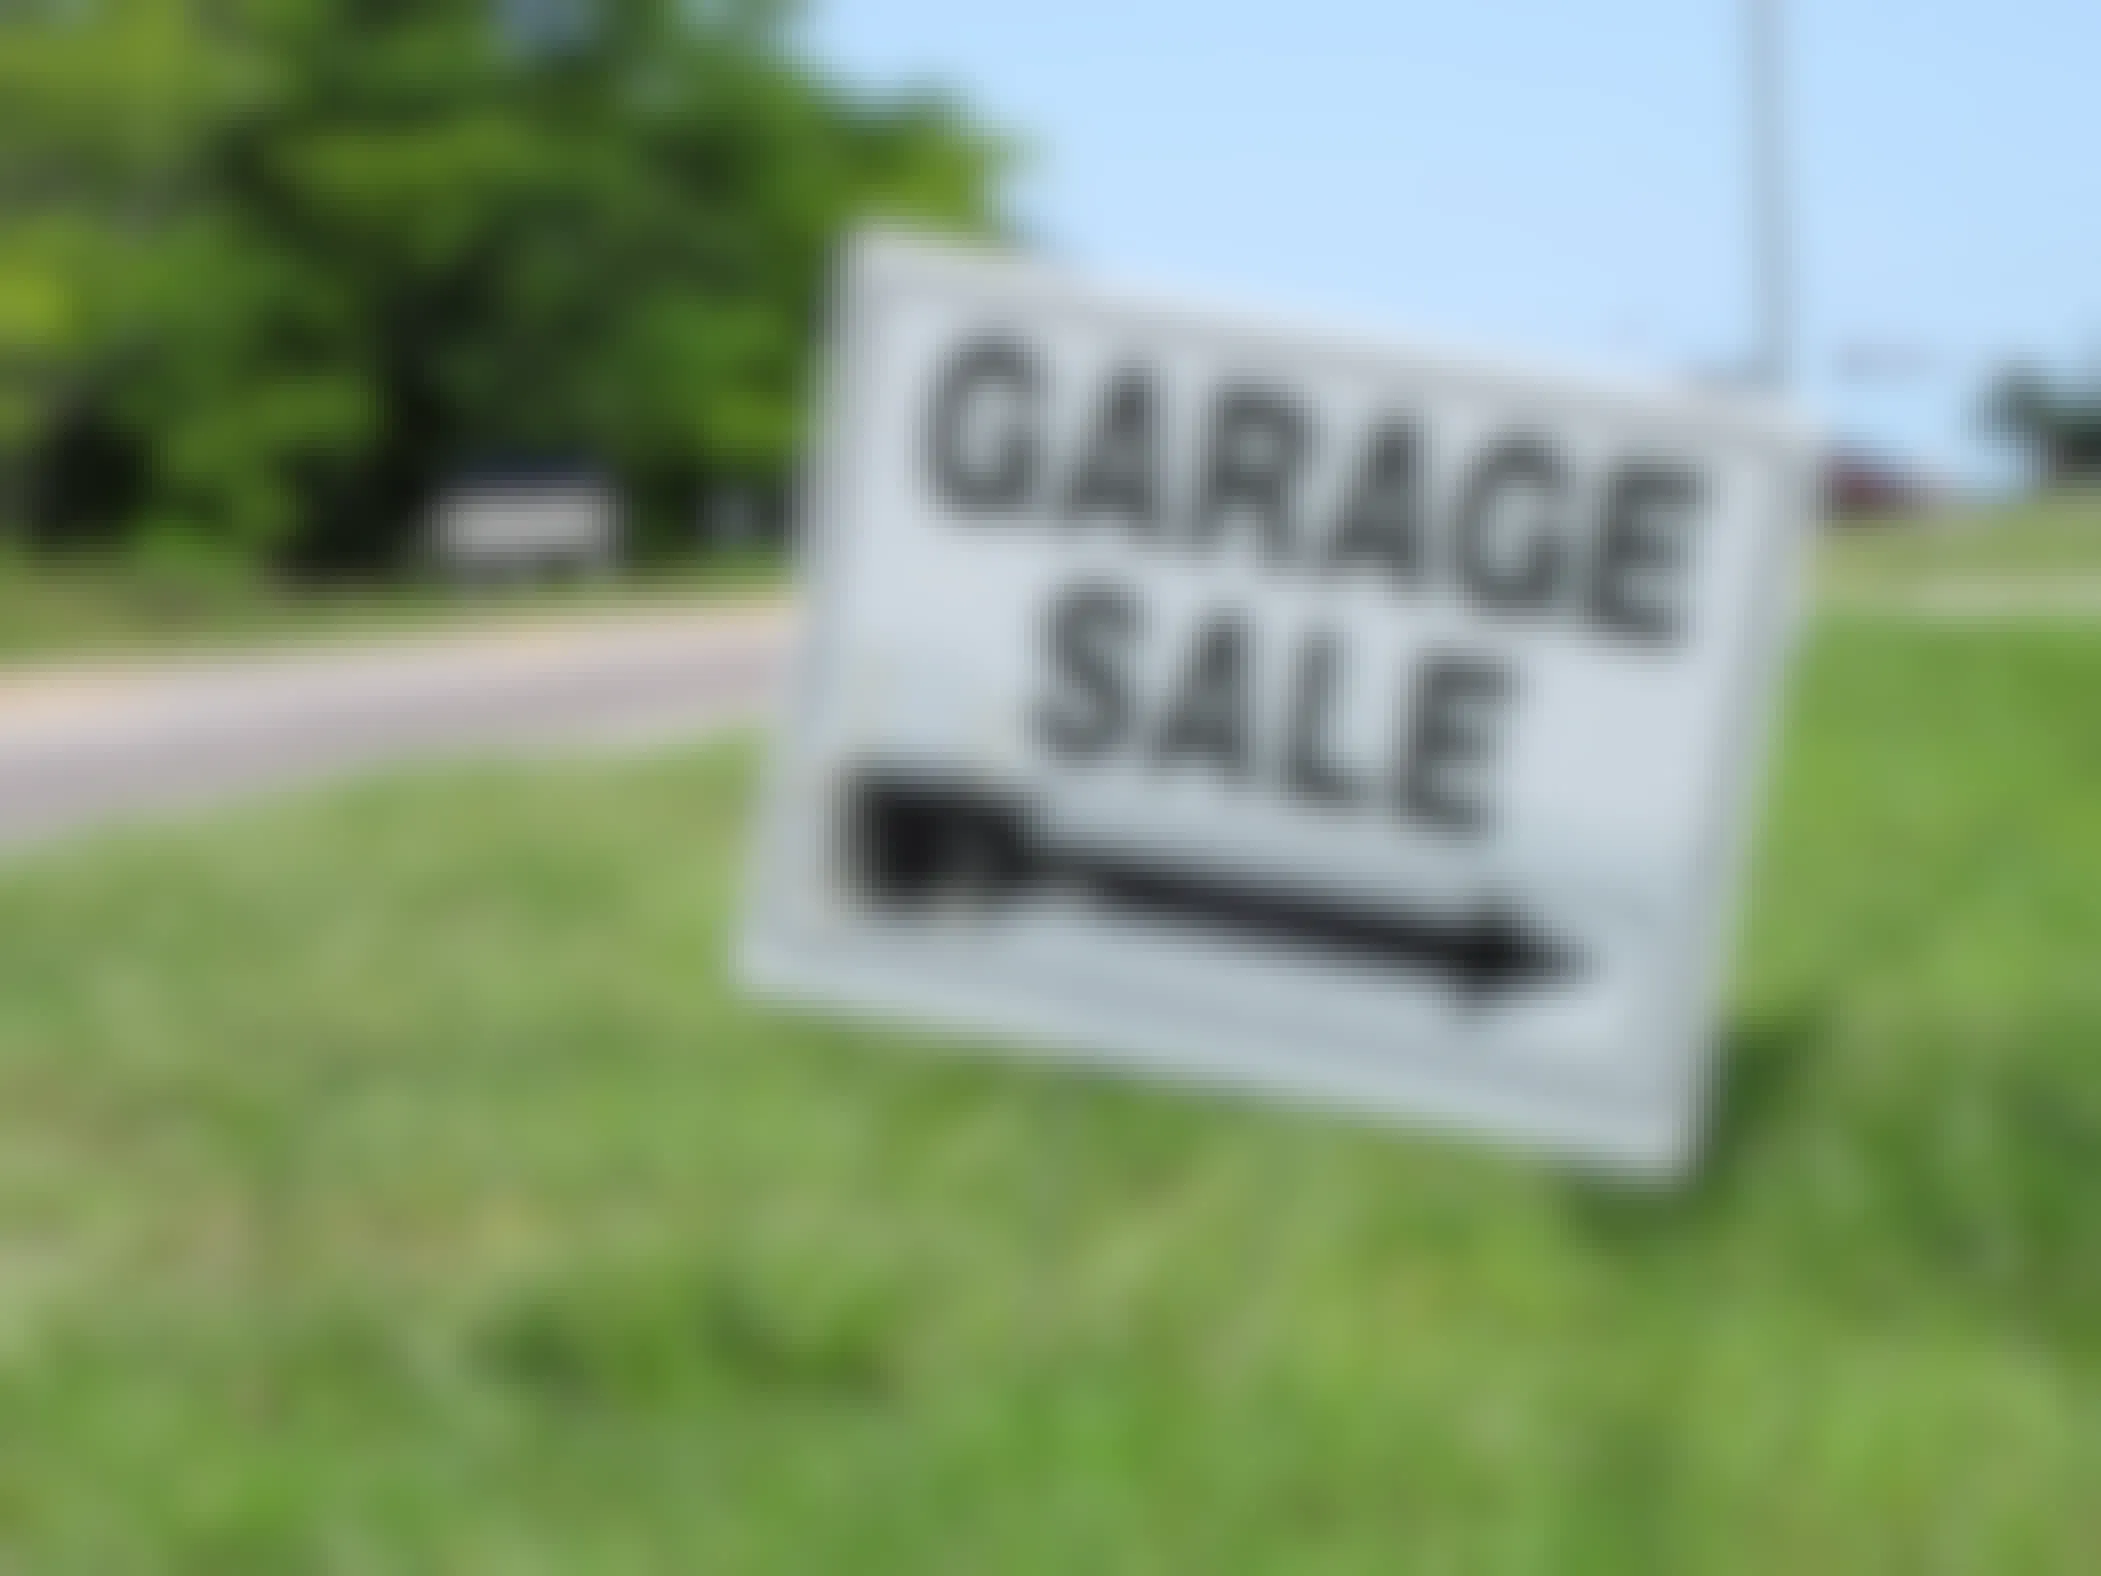 A Garage Sale sign on a curb with an arrow pointing to the right